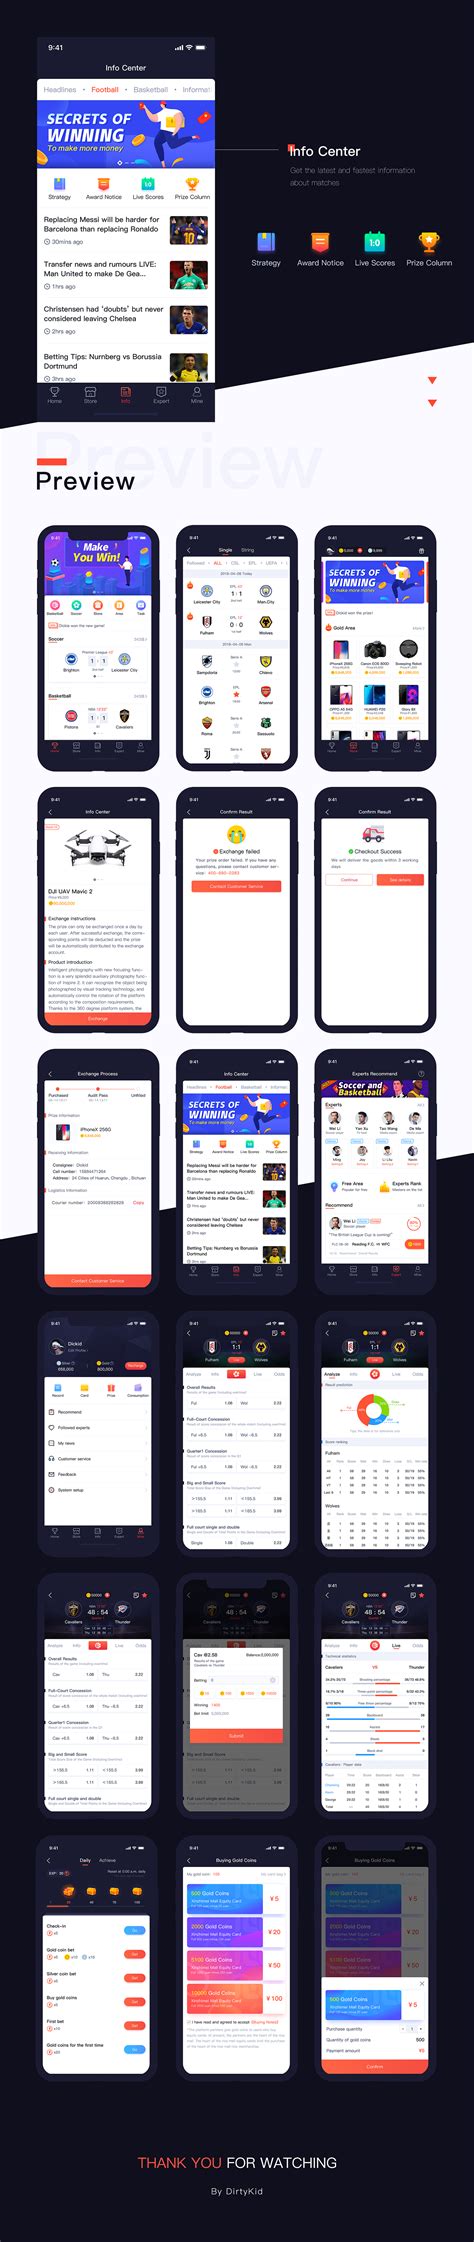 Our sports betting app developers have delivered android & ios sports betting allows users to take a personal interest in the games they already love. Sports Betting App on Behance